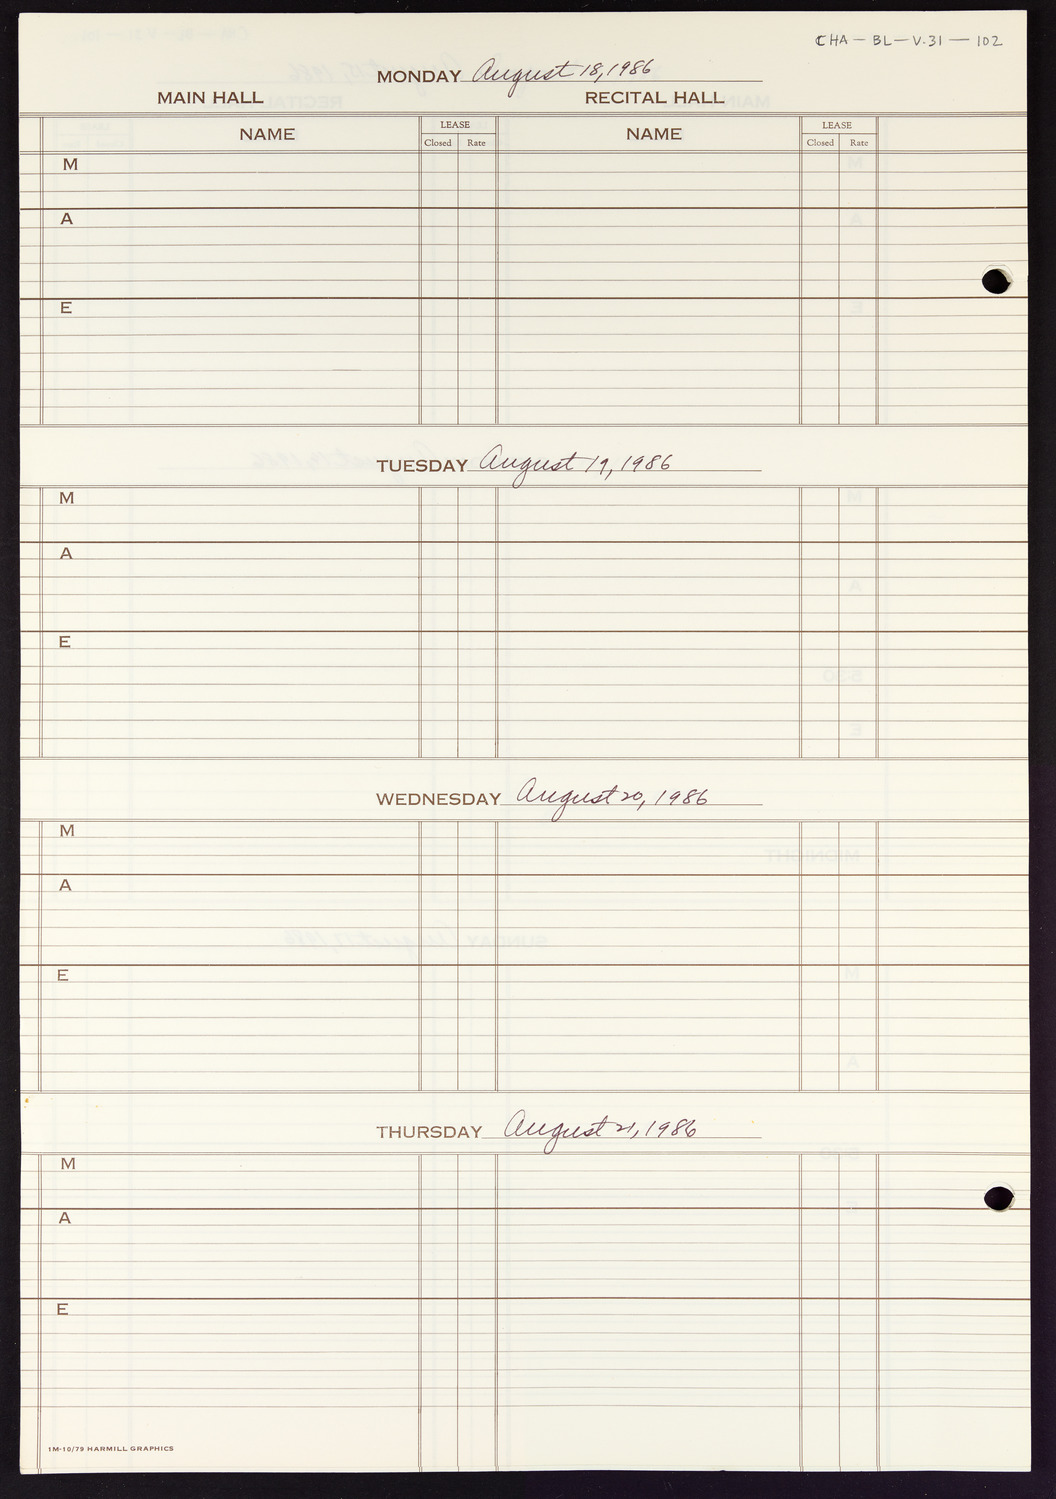 Carnegie Hall Booking Ledger, volume 31, page 102